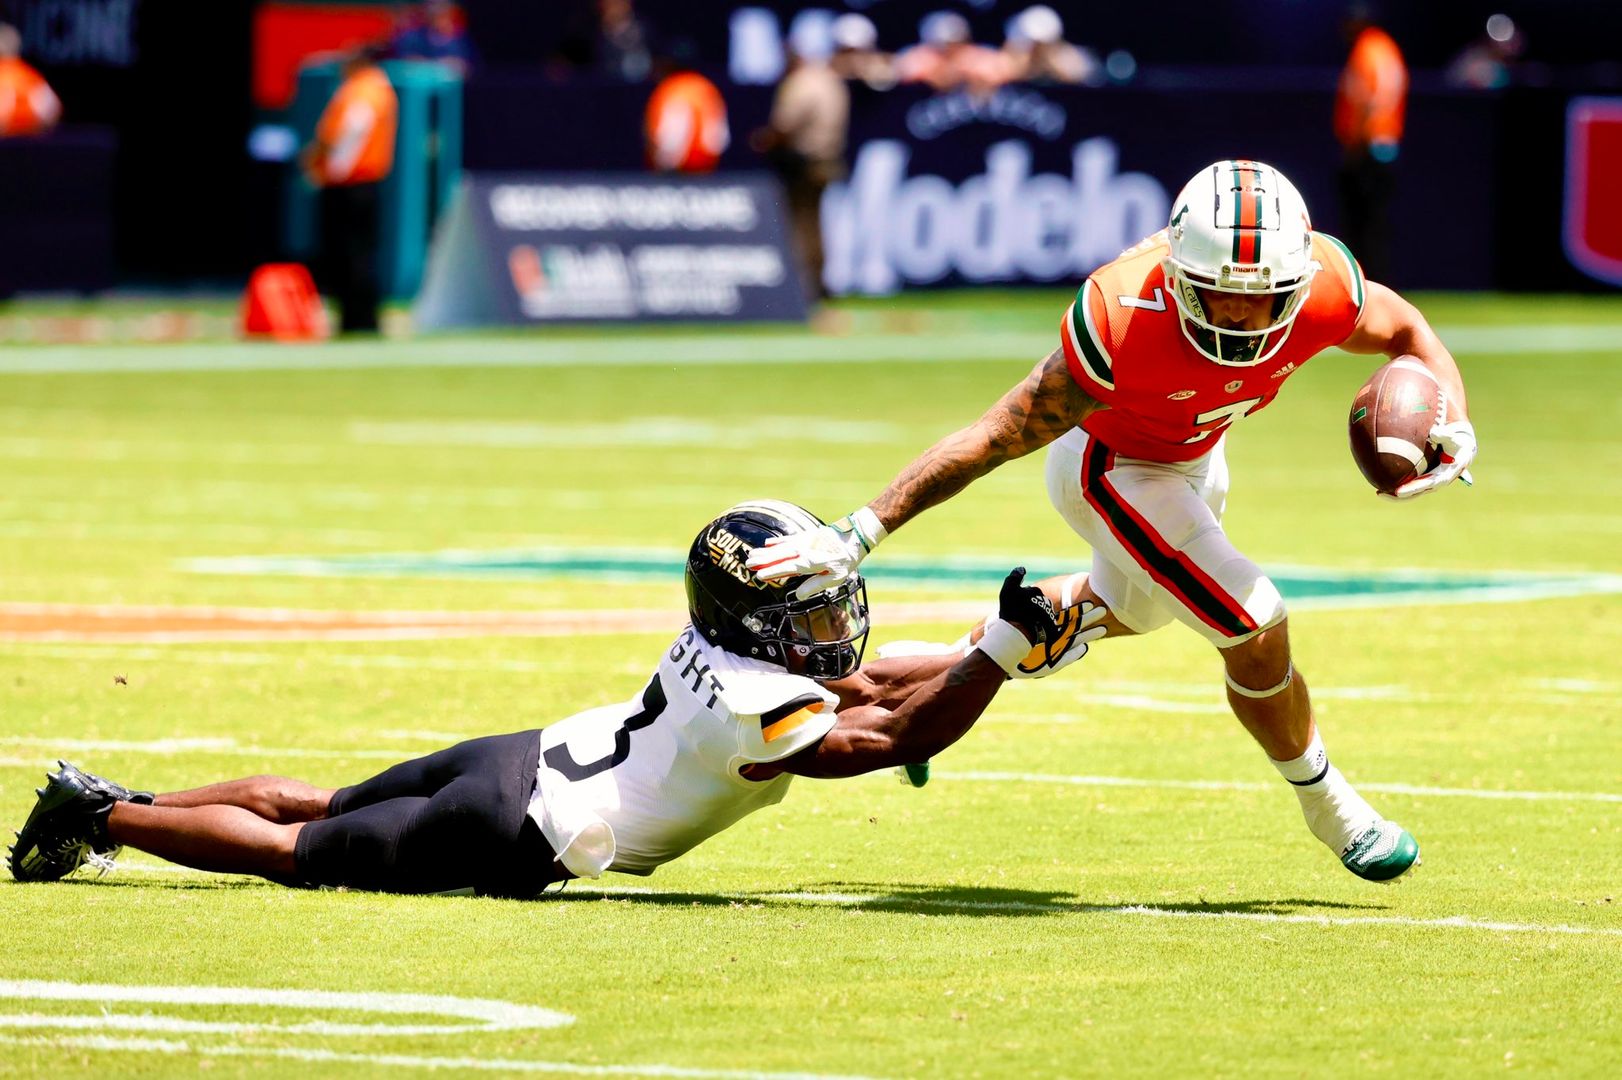 Photo Gallery: Canes Football vs. Southern Miss